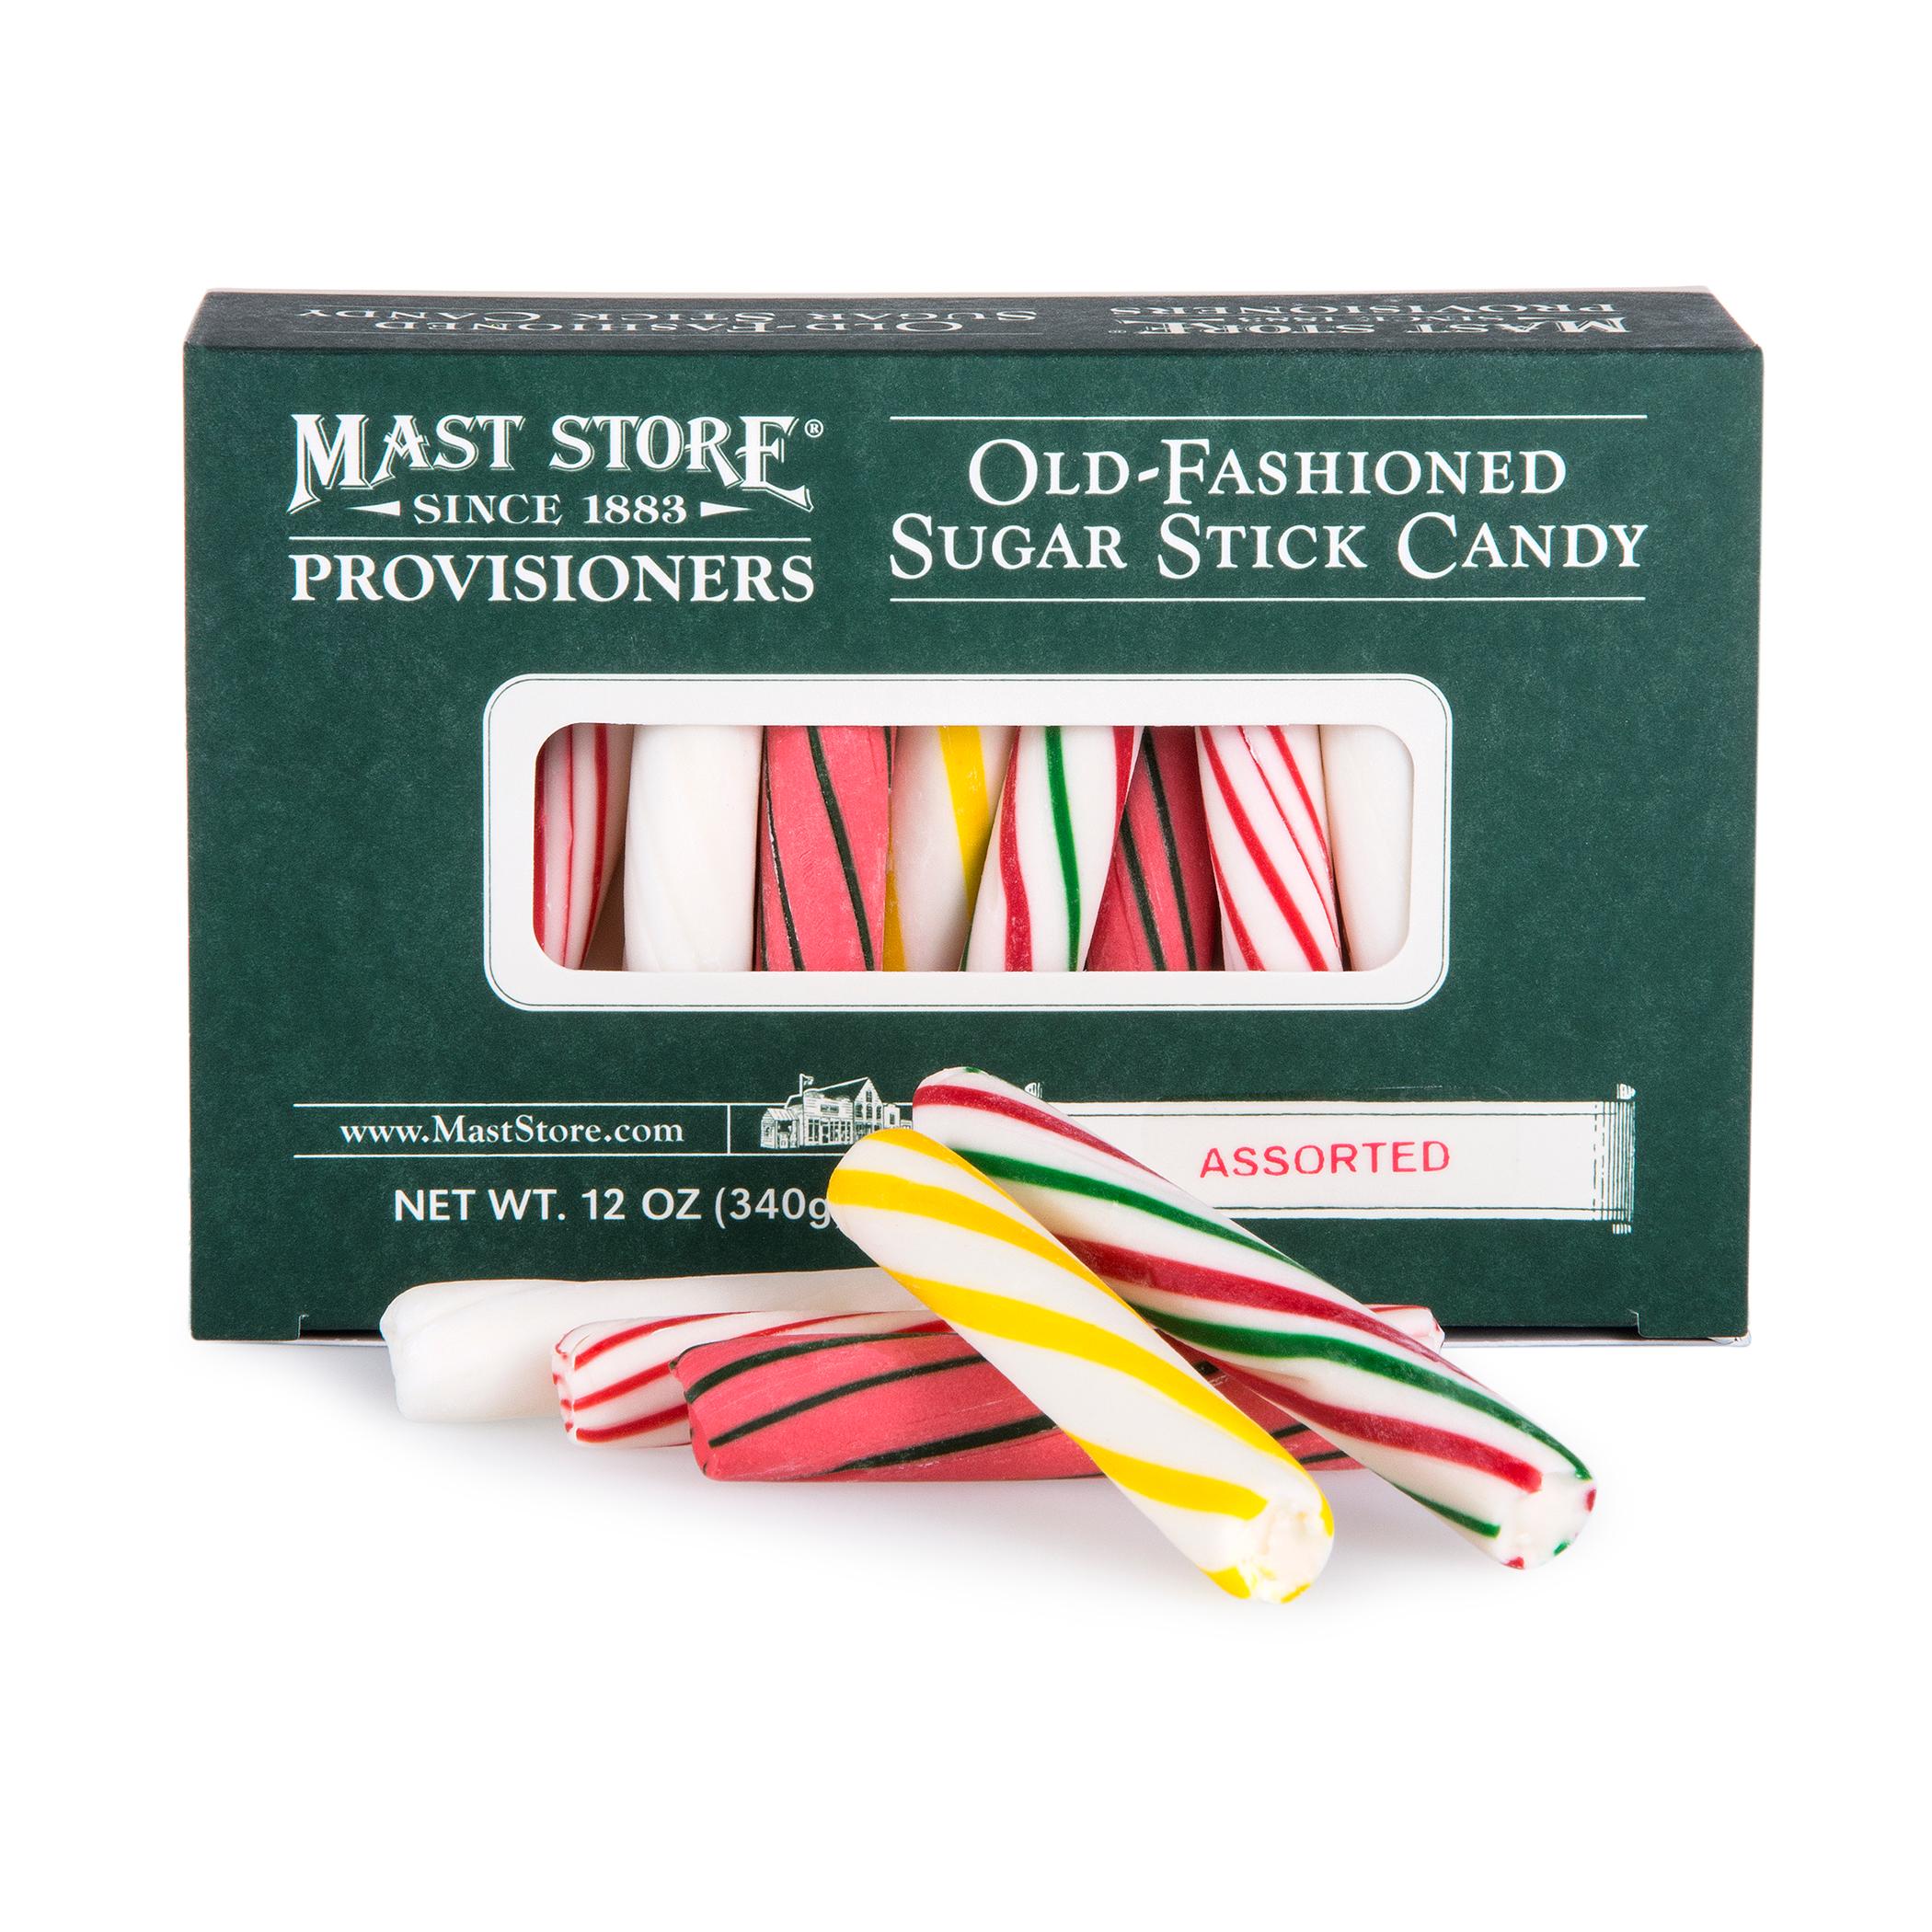  Mast Store Provisioners Assorted Old- Fashioned Sugar Stick Candy